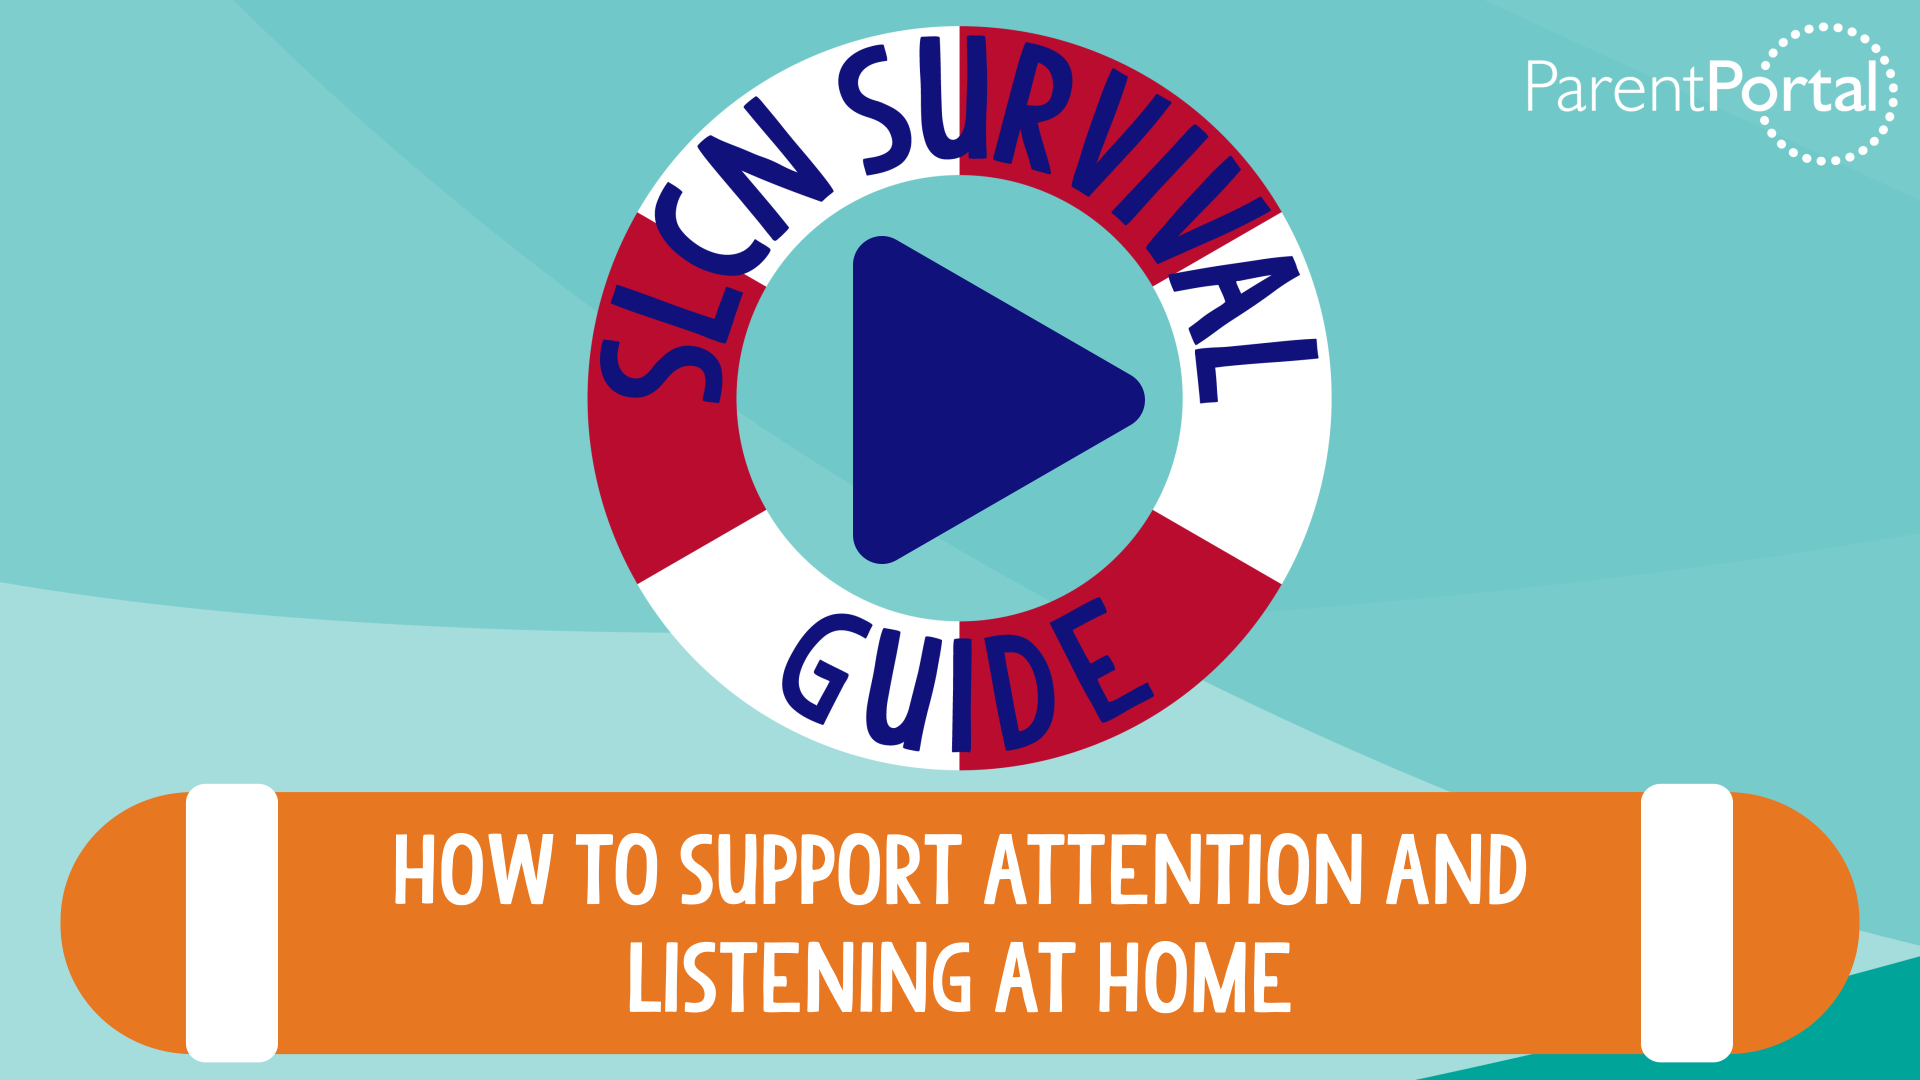 SLCN Survival Guide 1 - How to Support Attention and Listening Video